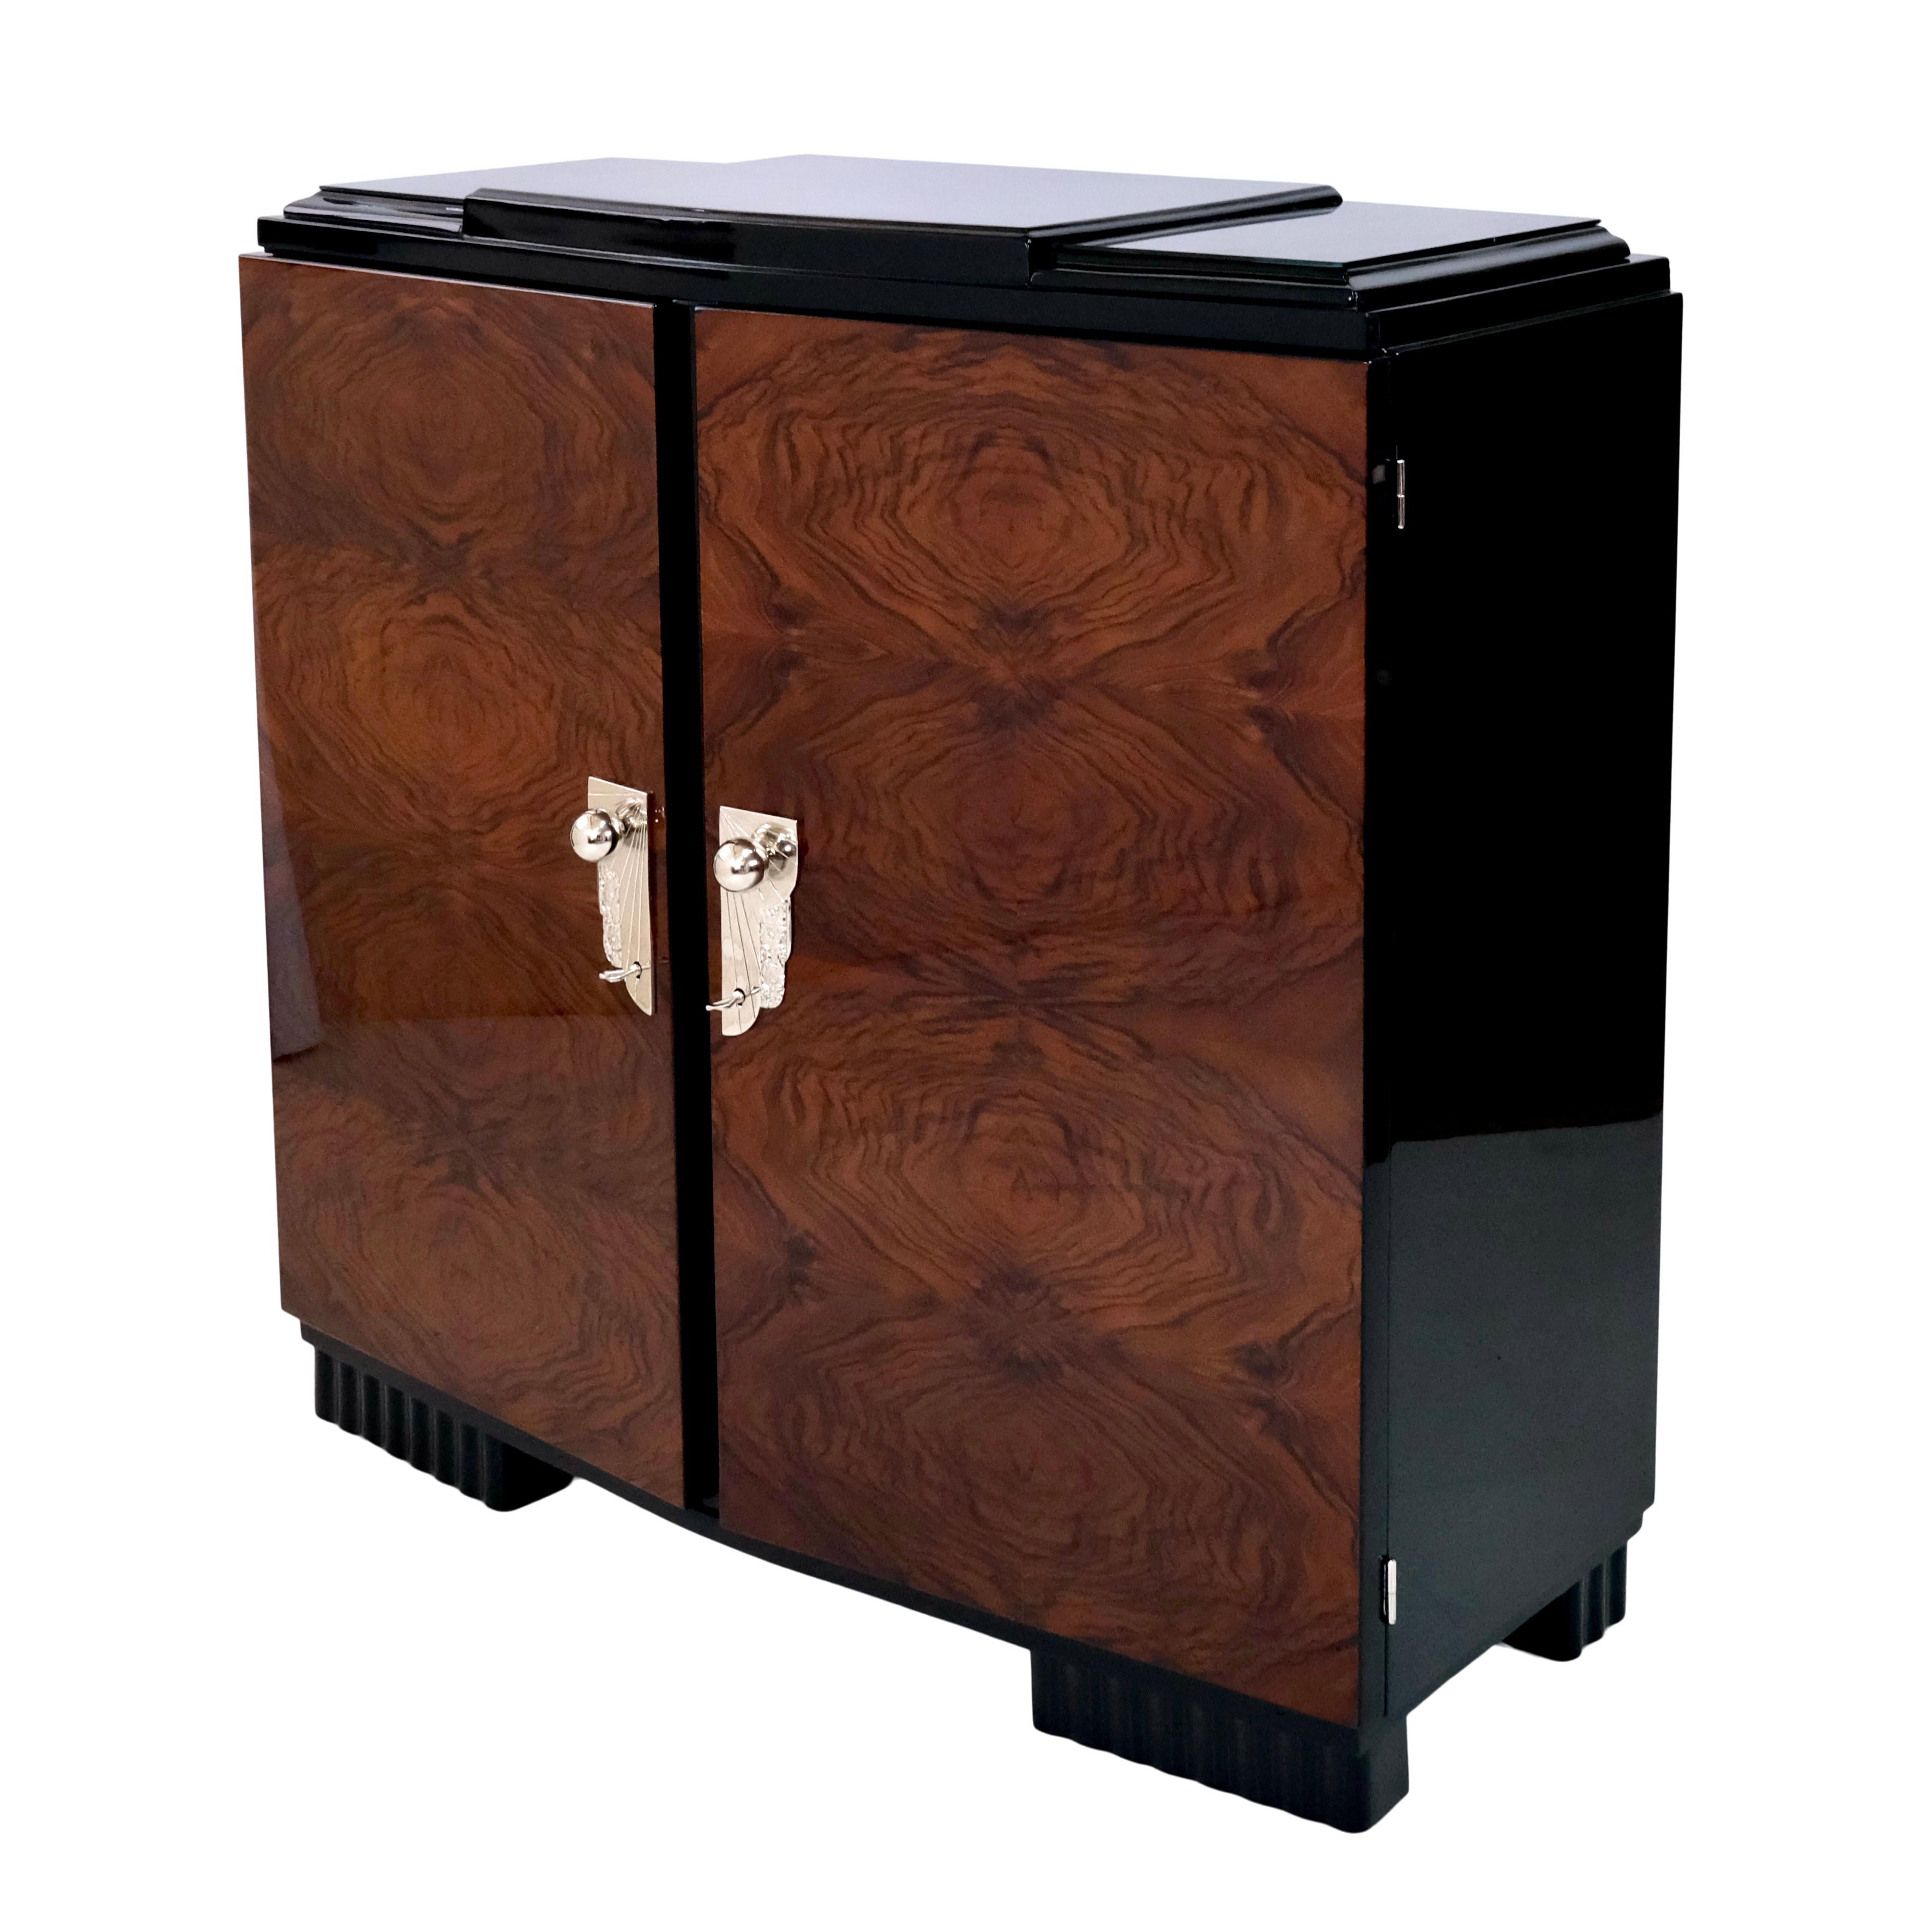 Mid-20th Century French, 1930s Art Deco Highboard with Nutwood Veneer and Black Lacquer Body